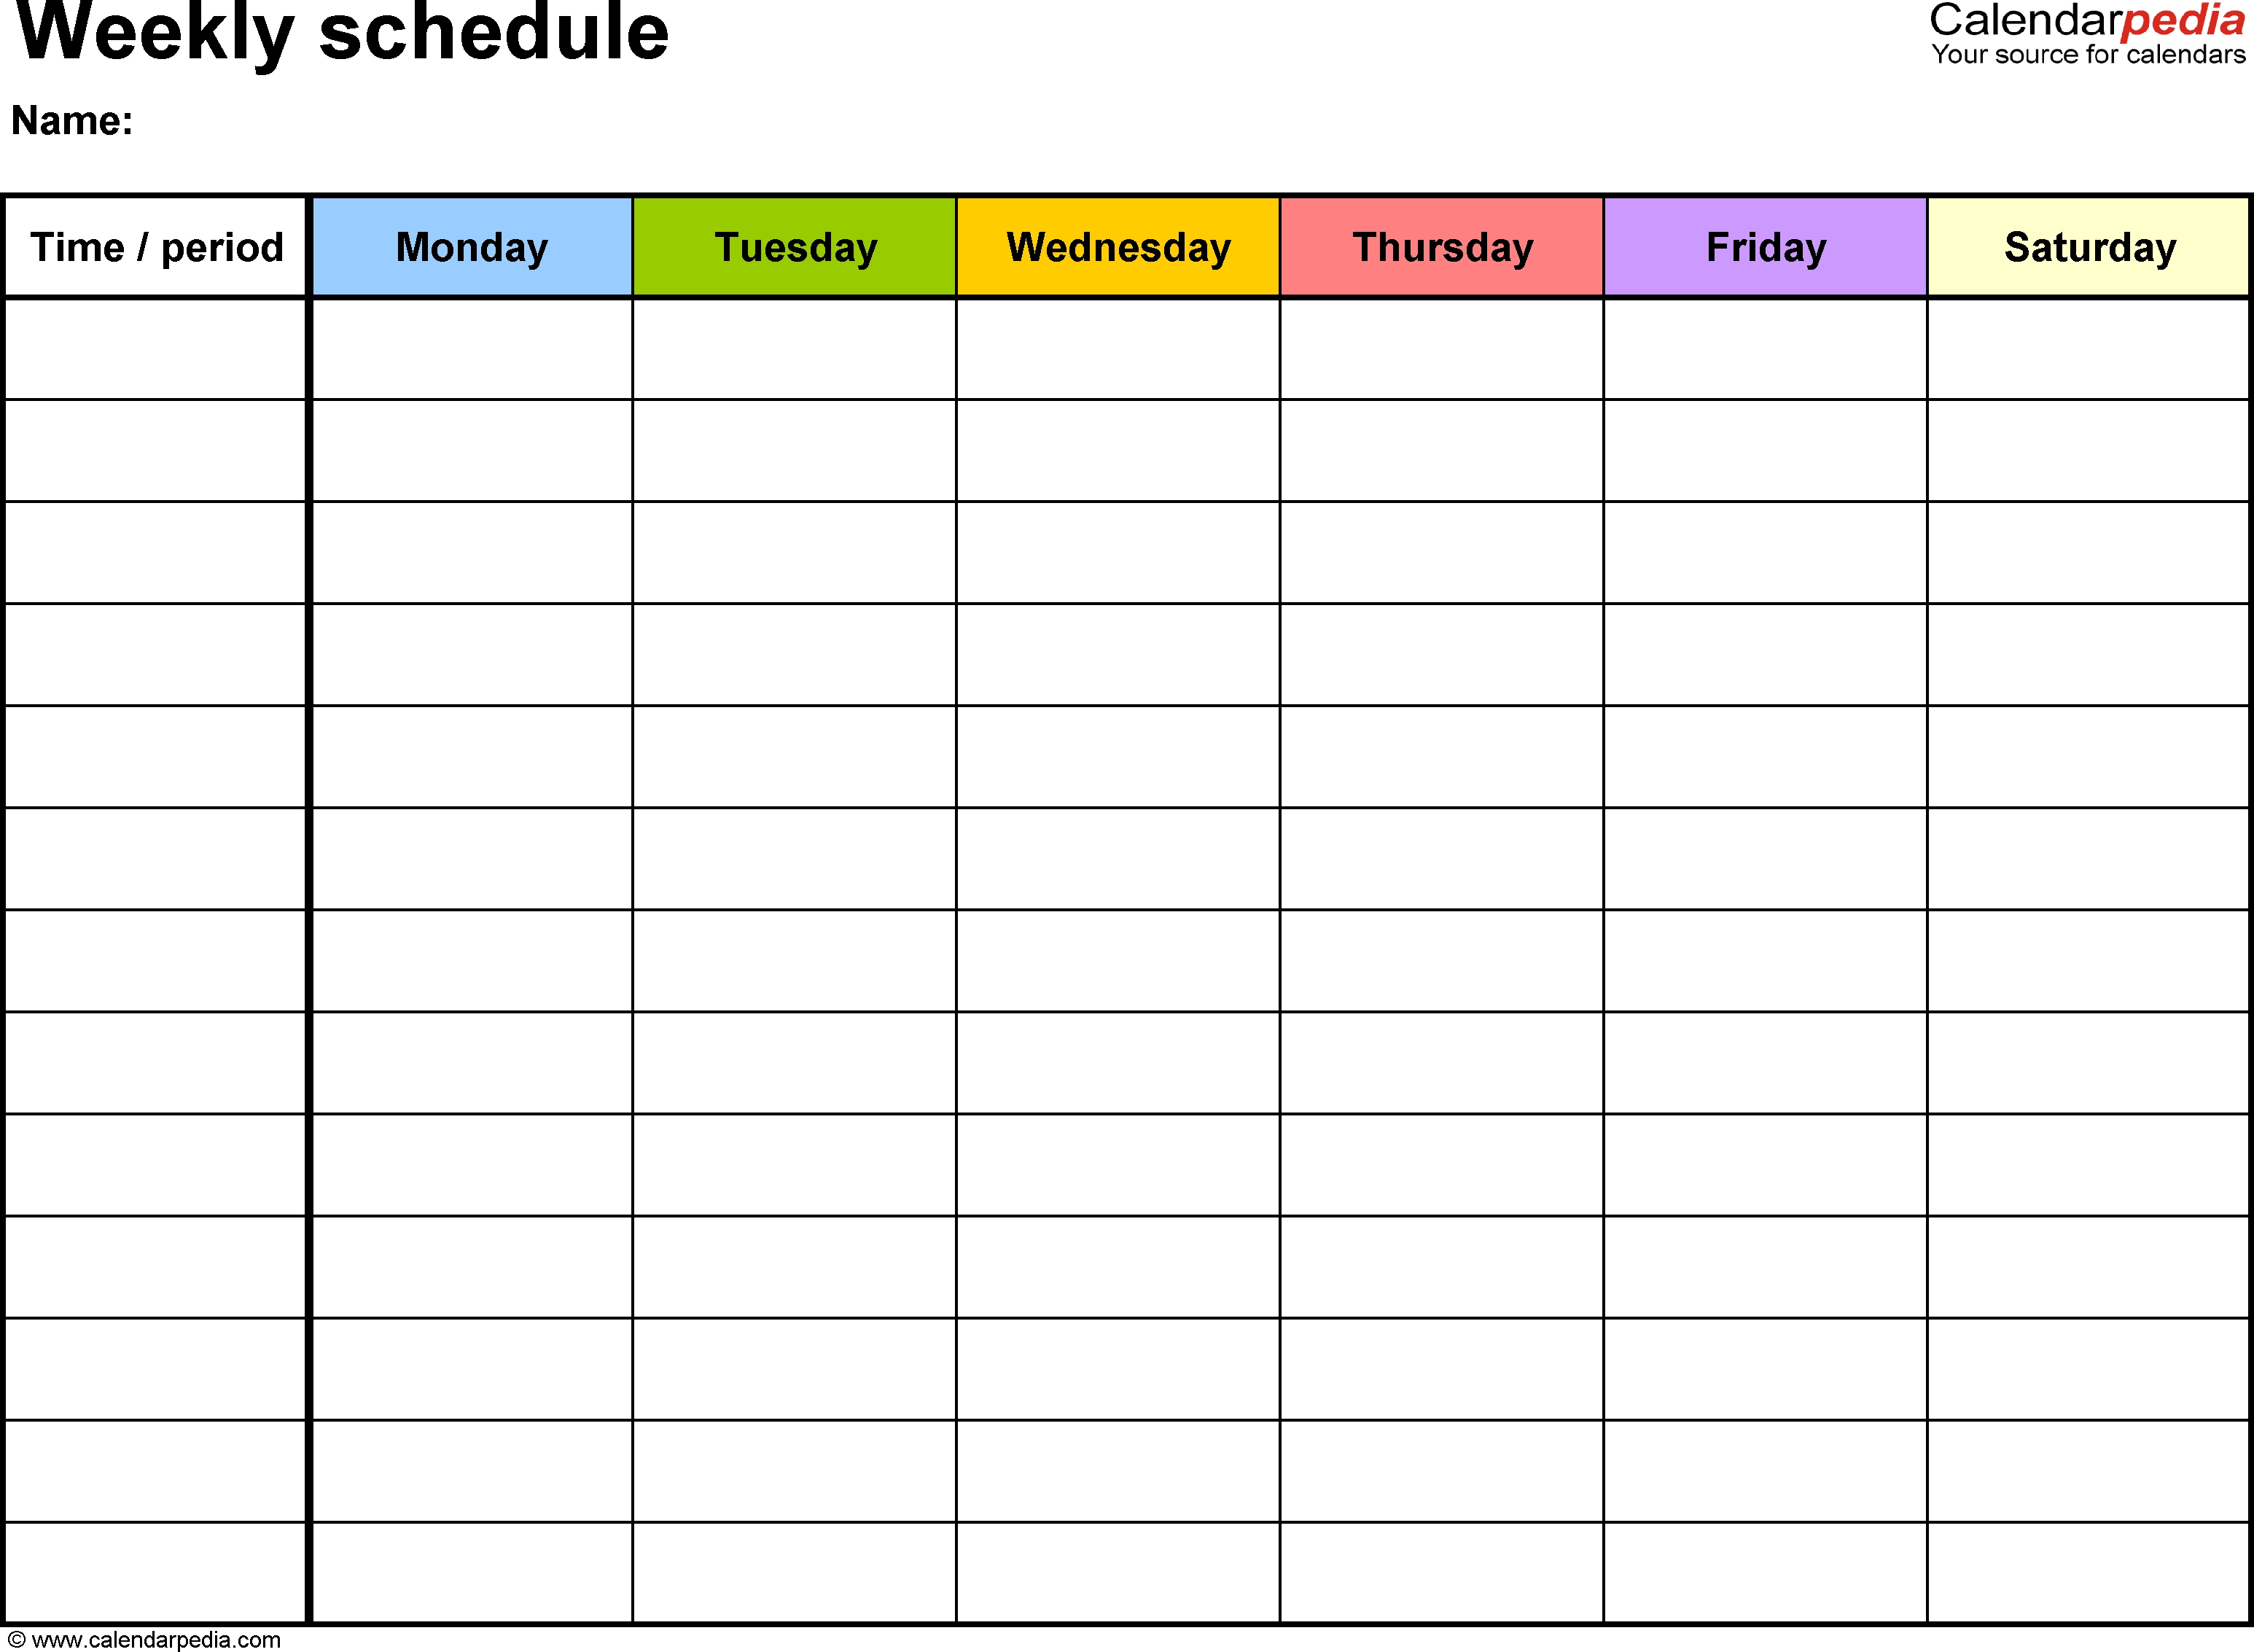 Free Weekly Schedule Templates For Word - 18 Templates for Weekly Calendar Template 5 Days